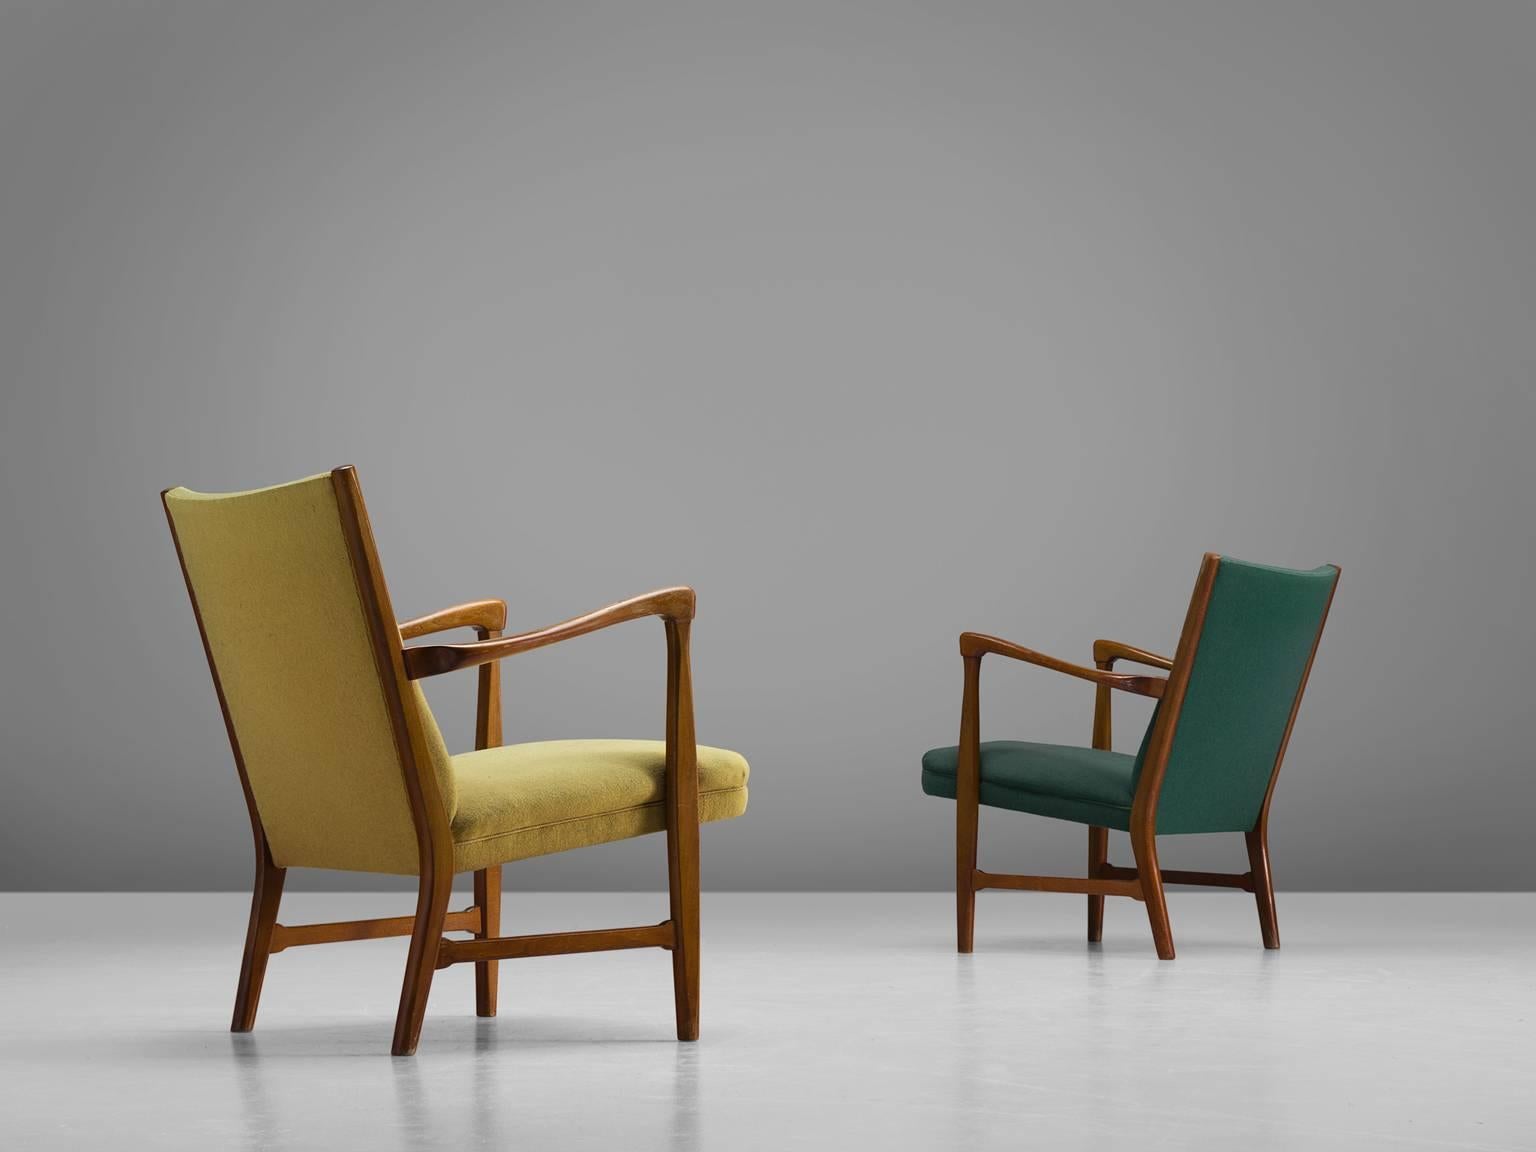 Scandinavian Modern Danish Reclining Wingback Chairs in Green and Yellow Upholstery, 1950s